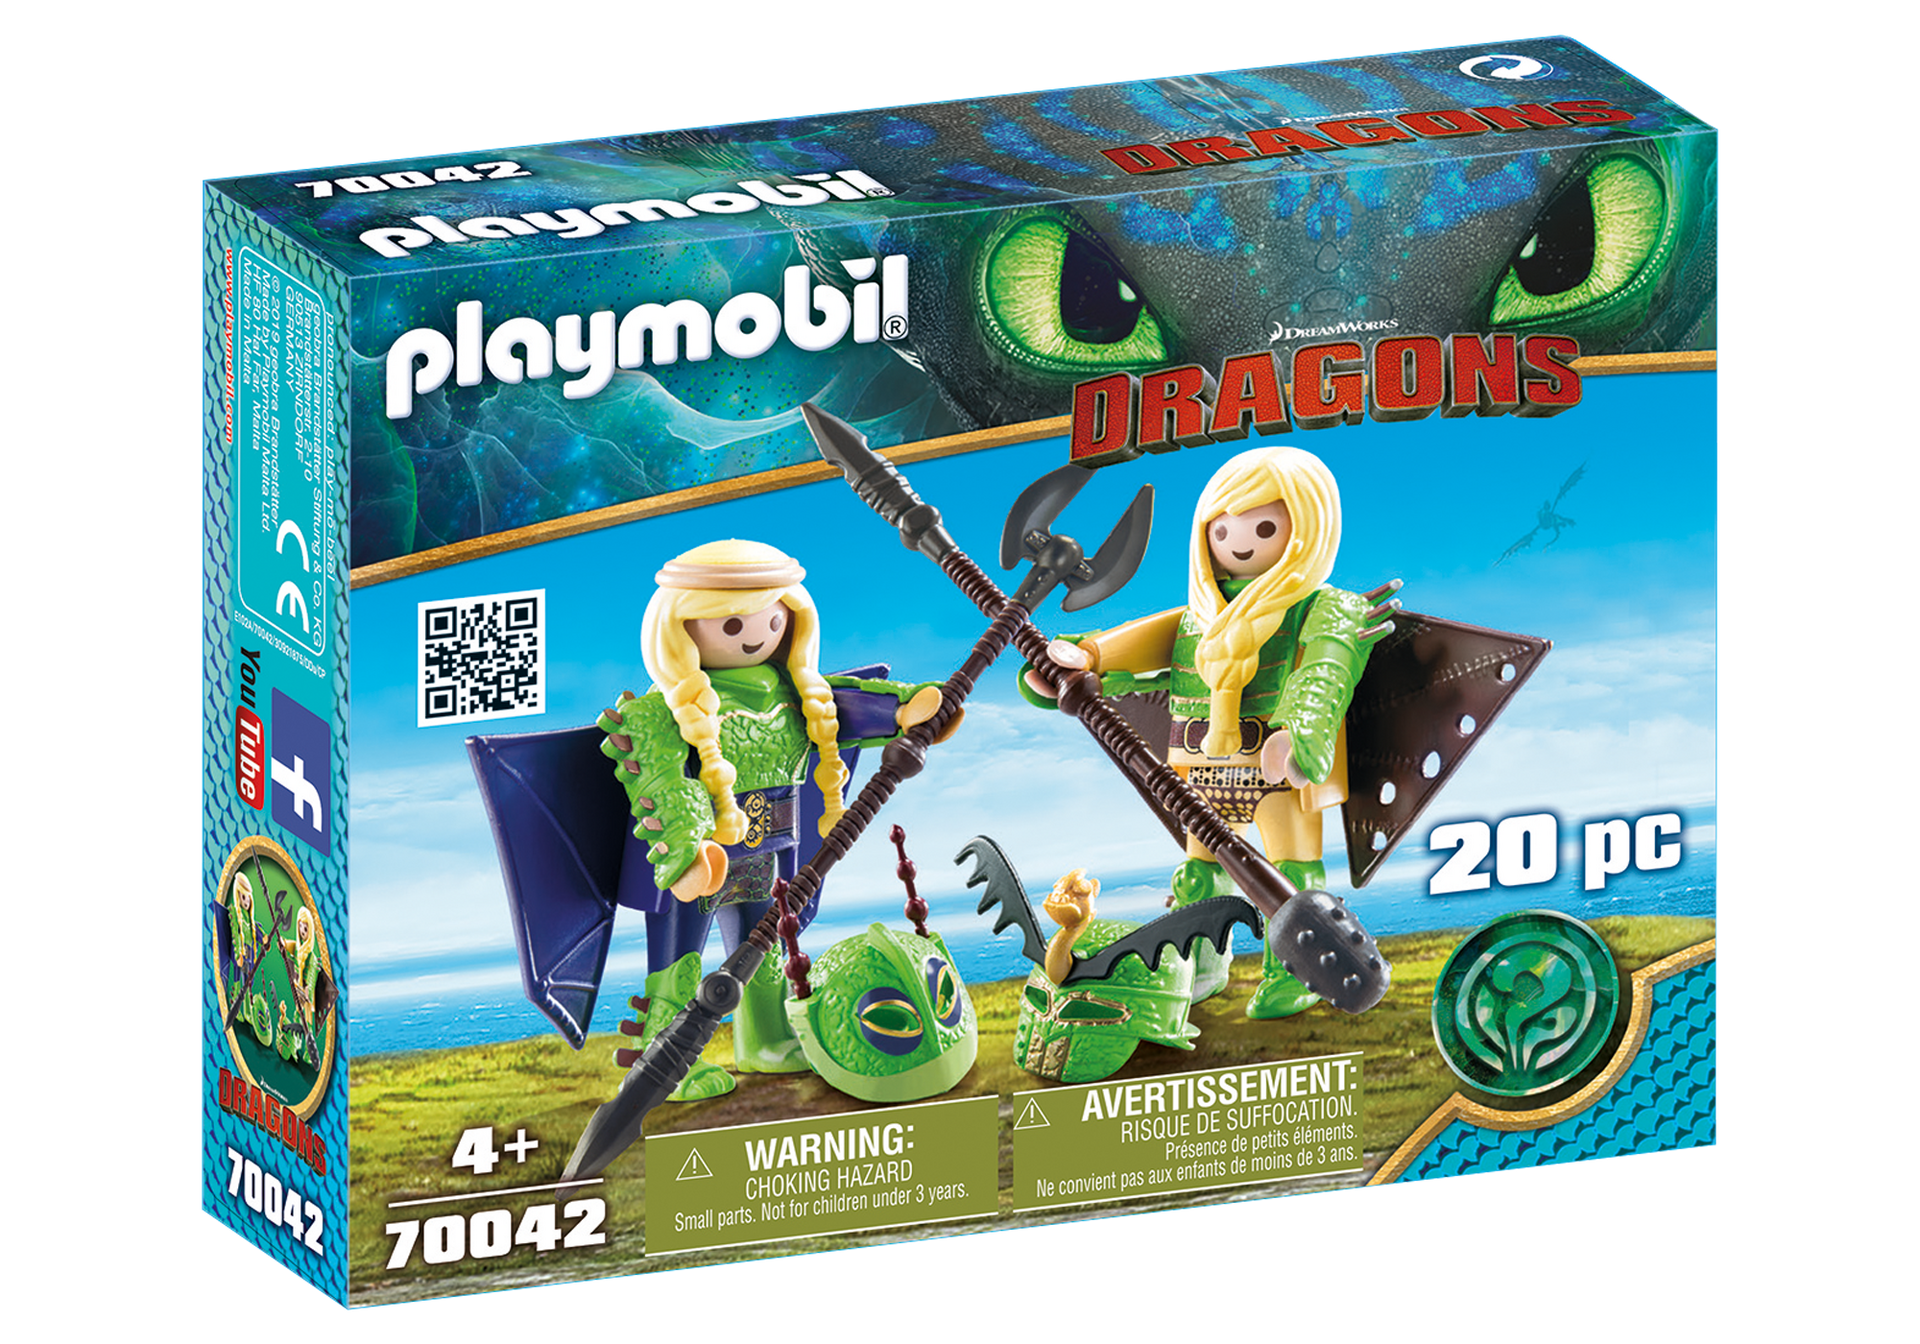 Playmobil - Ruffnut and Tuffnut with Flight Suit (70042)